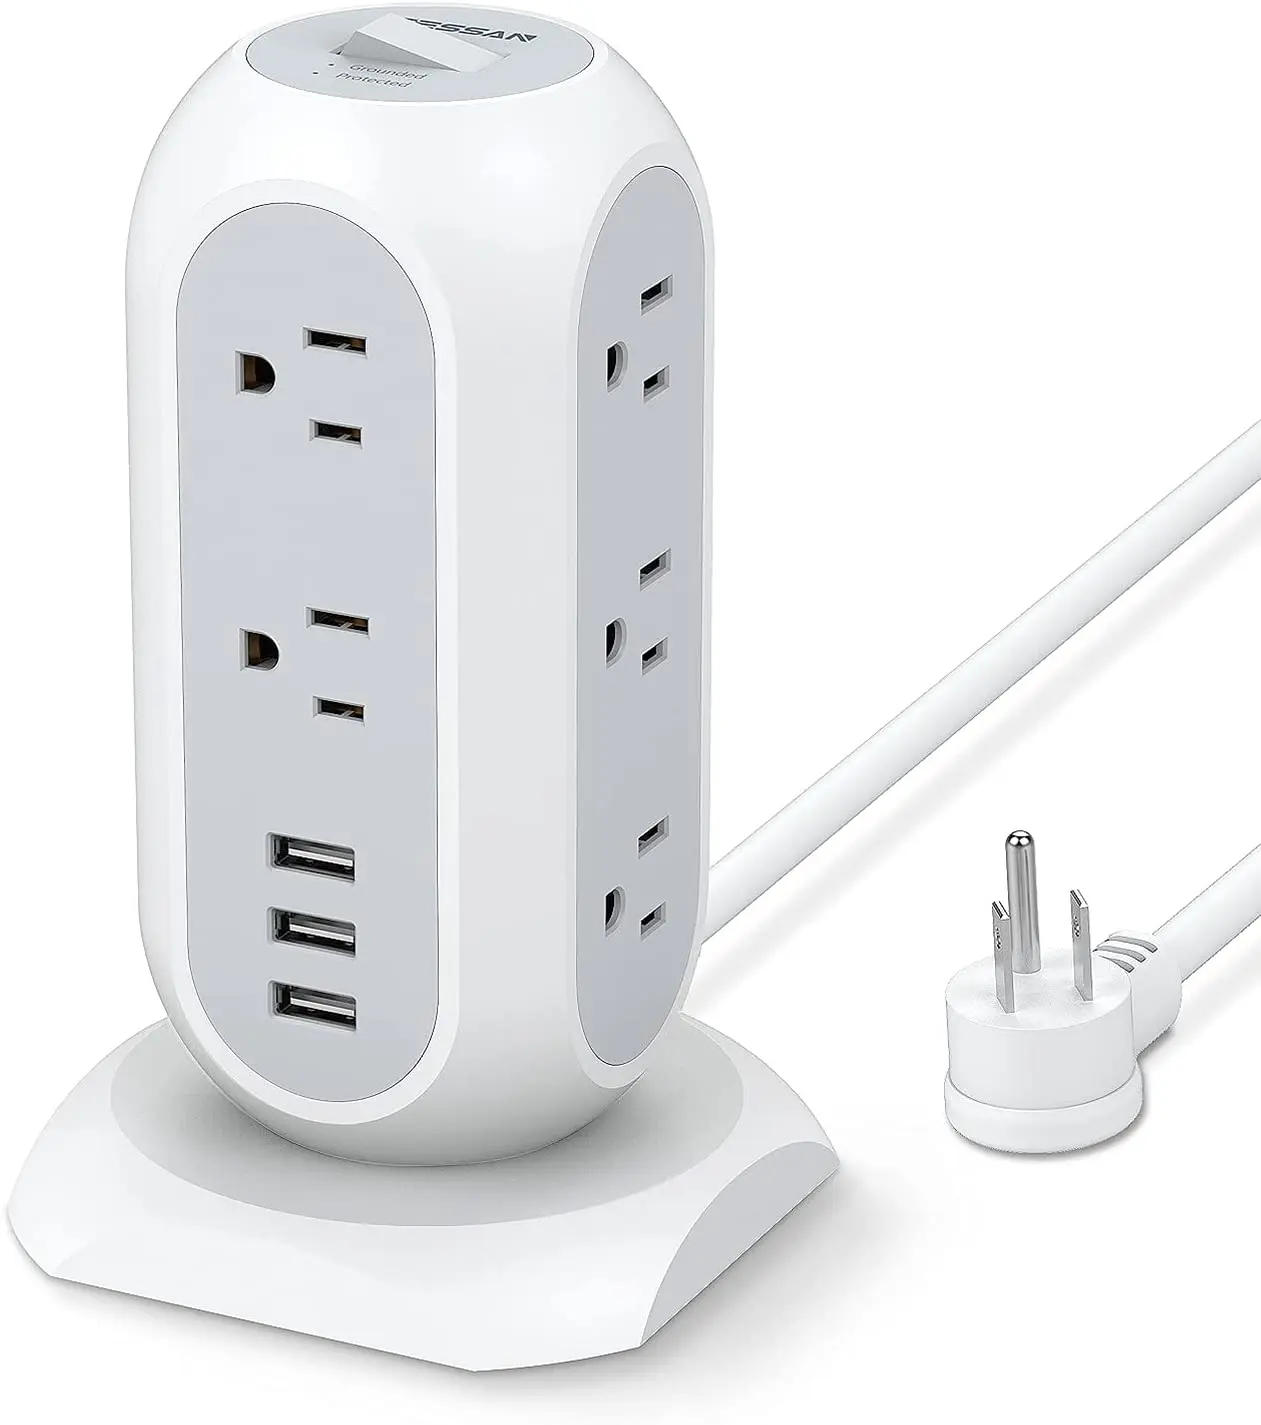 

Power Strip Tower TESSAN Surge Protector with 11 Widely Spaced Outlets 3 USB Ports, Extension Cord 6 Feet, Multi Outlets